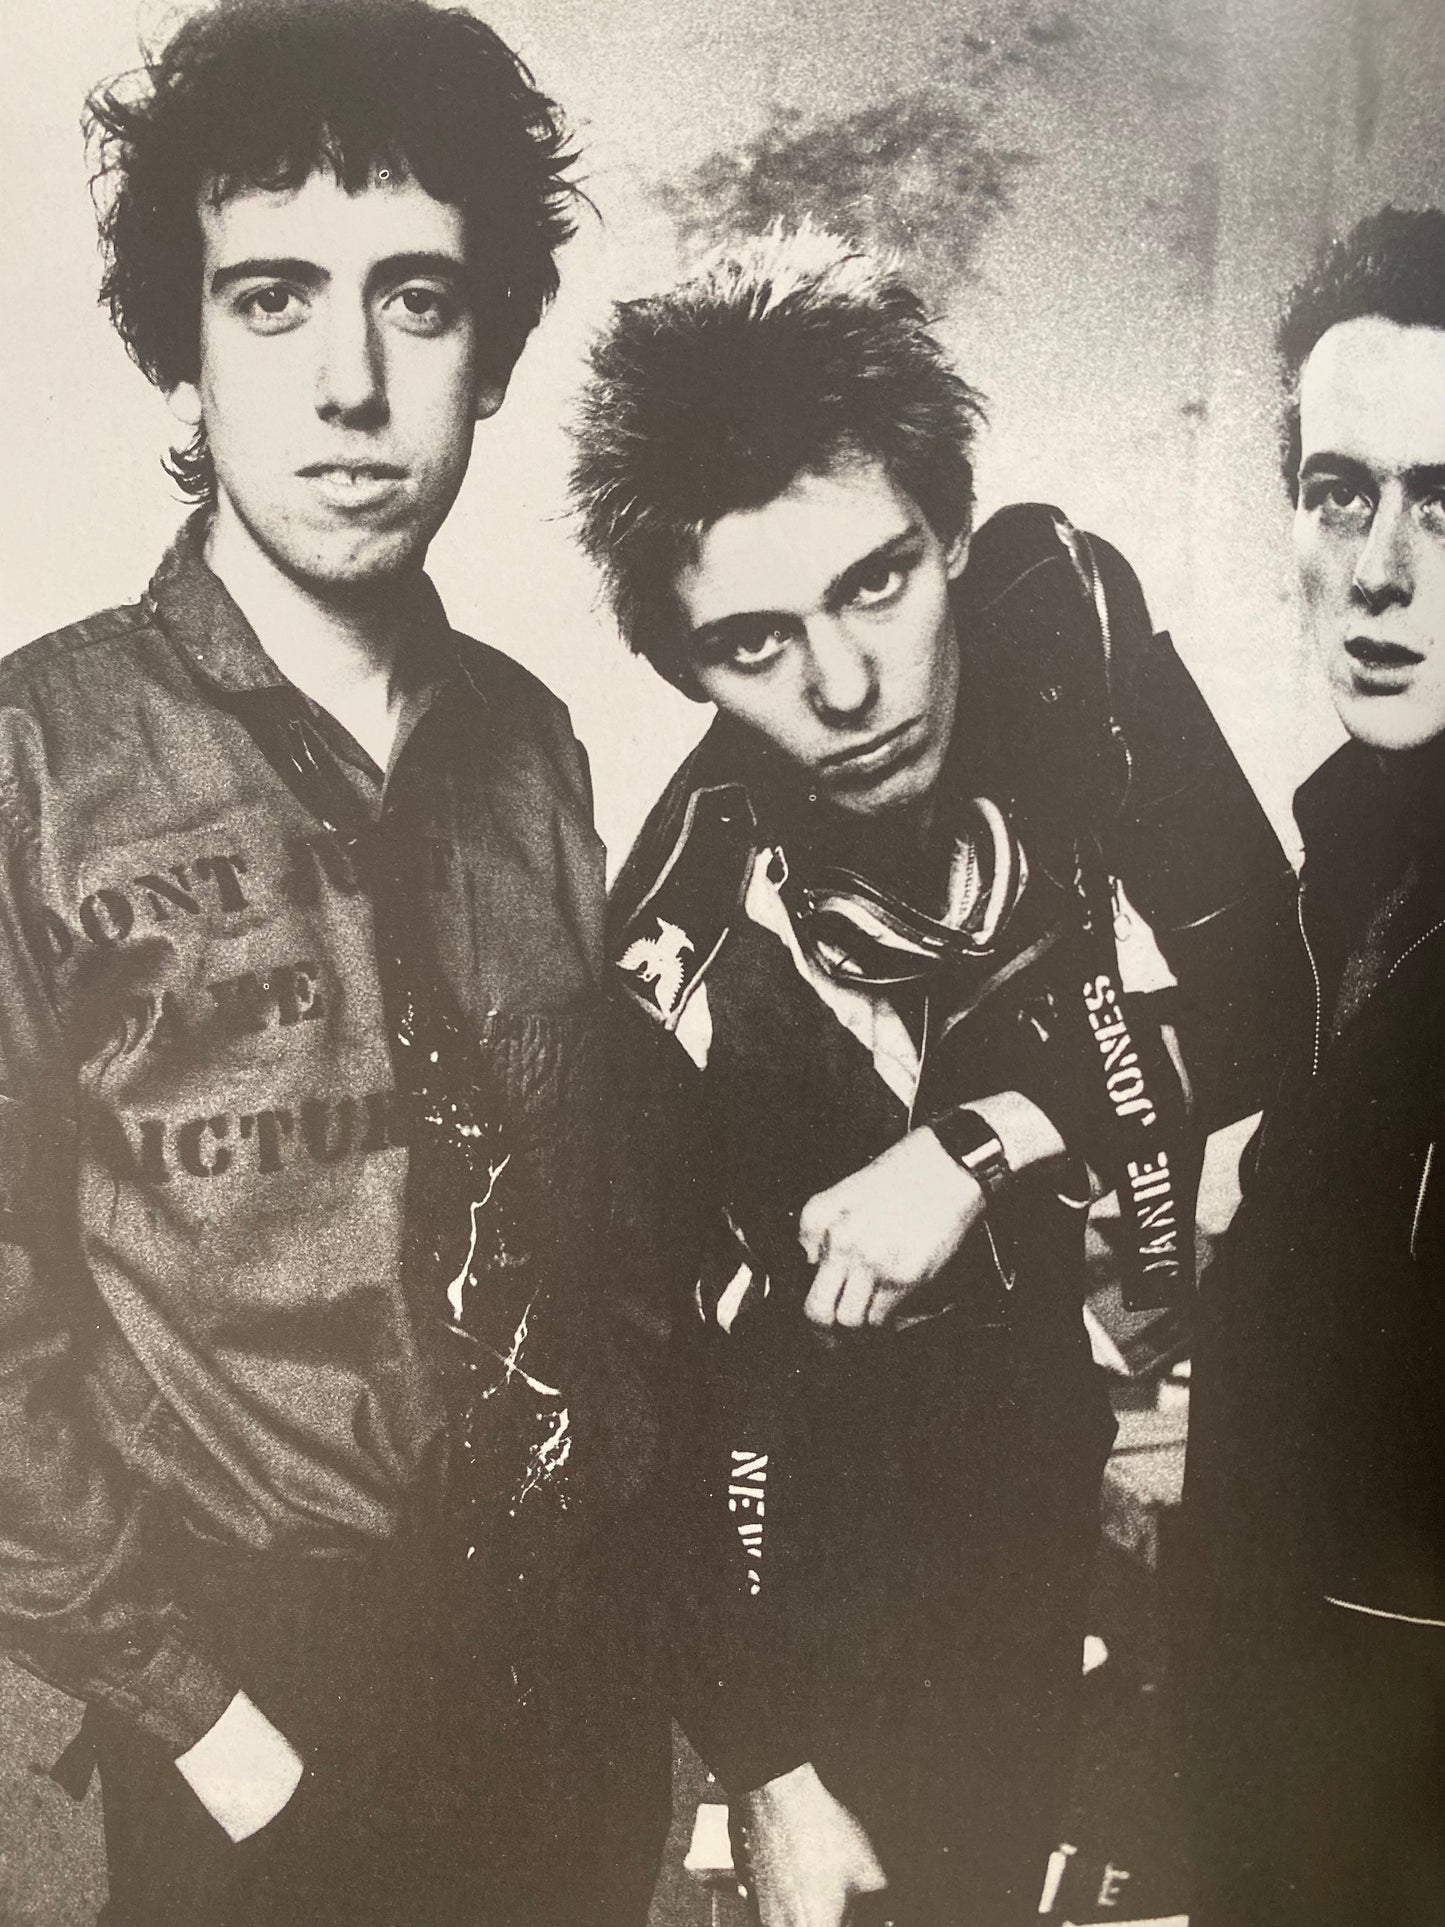 The Clash - The New Visual Documentary (1993)